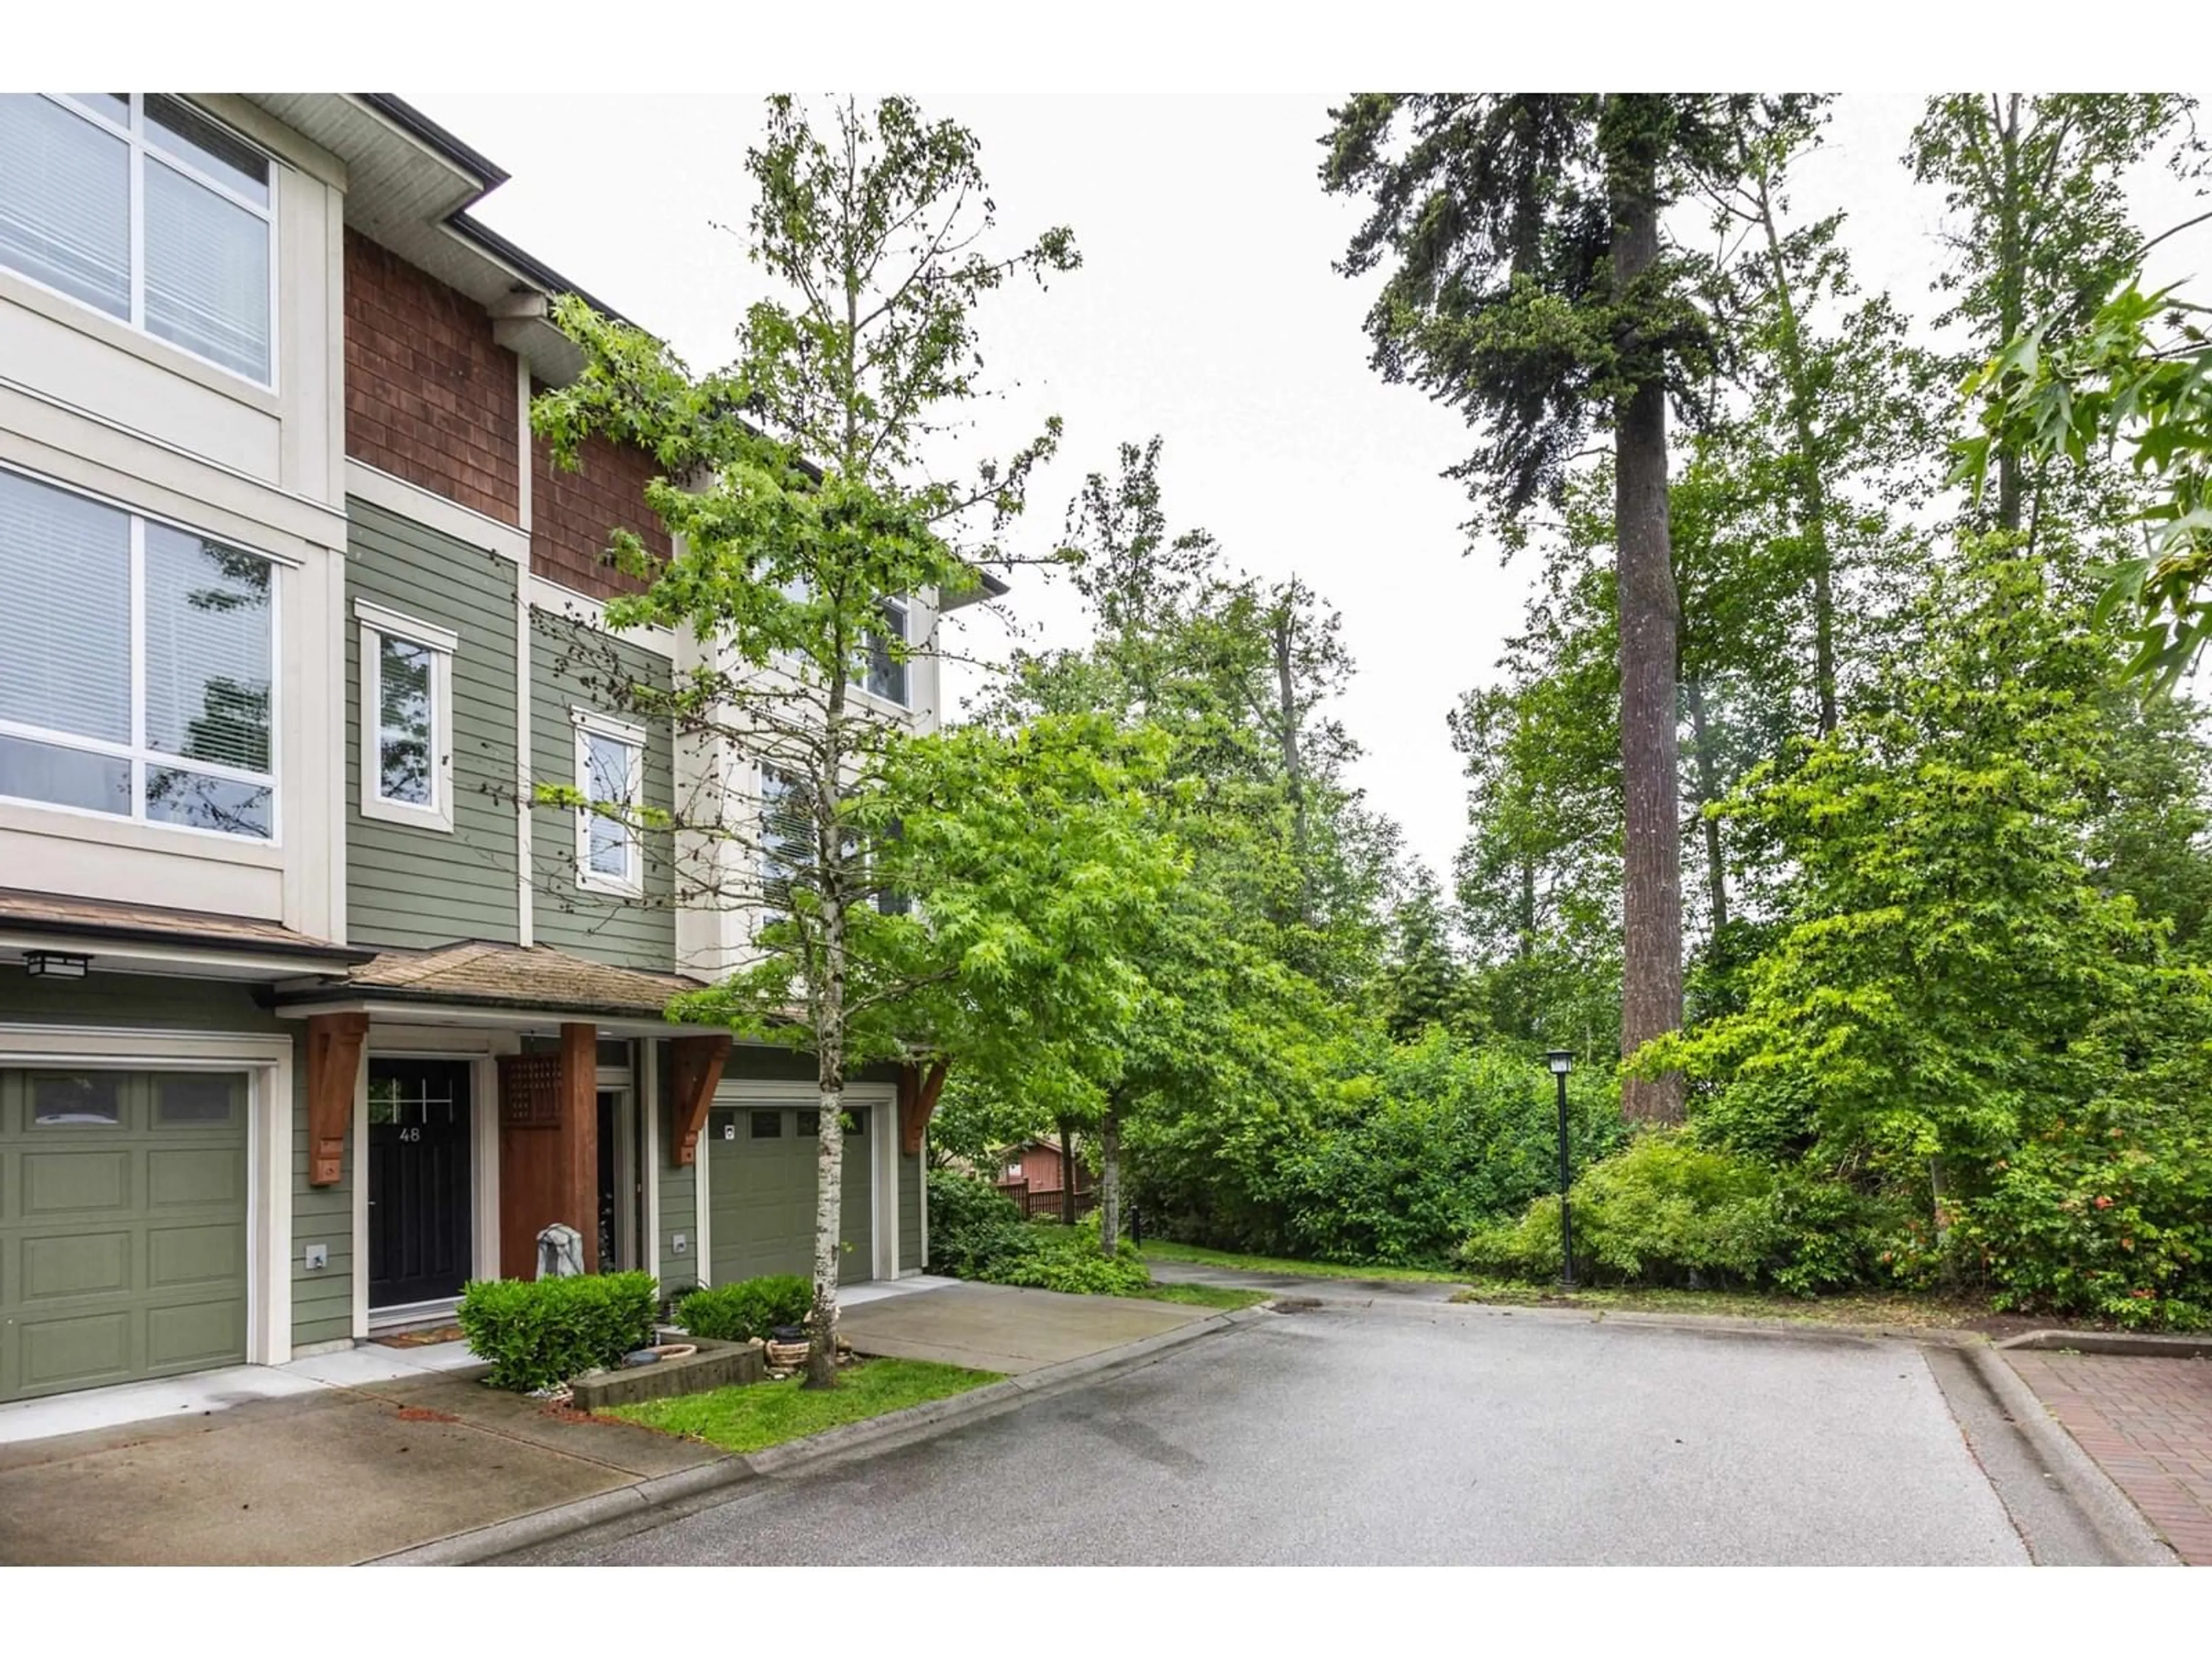 A pic from exterior of the house or condo for 47 2929 156 STREET, Surrey British Columbia V3S0S9